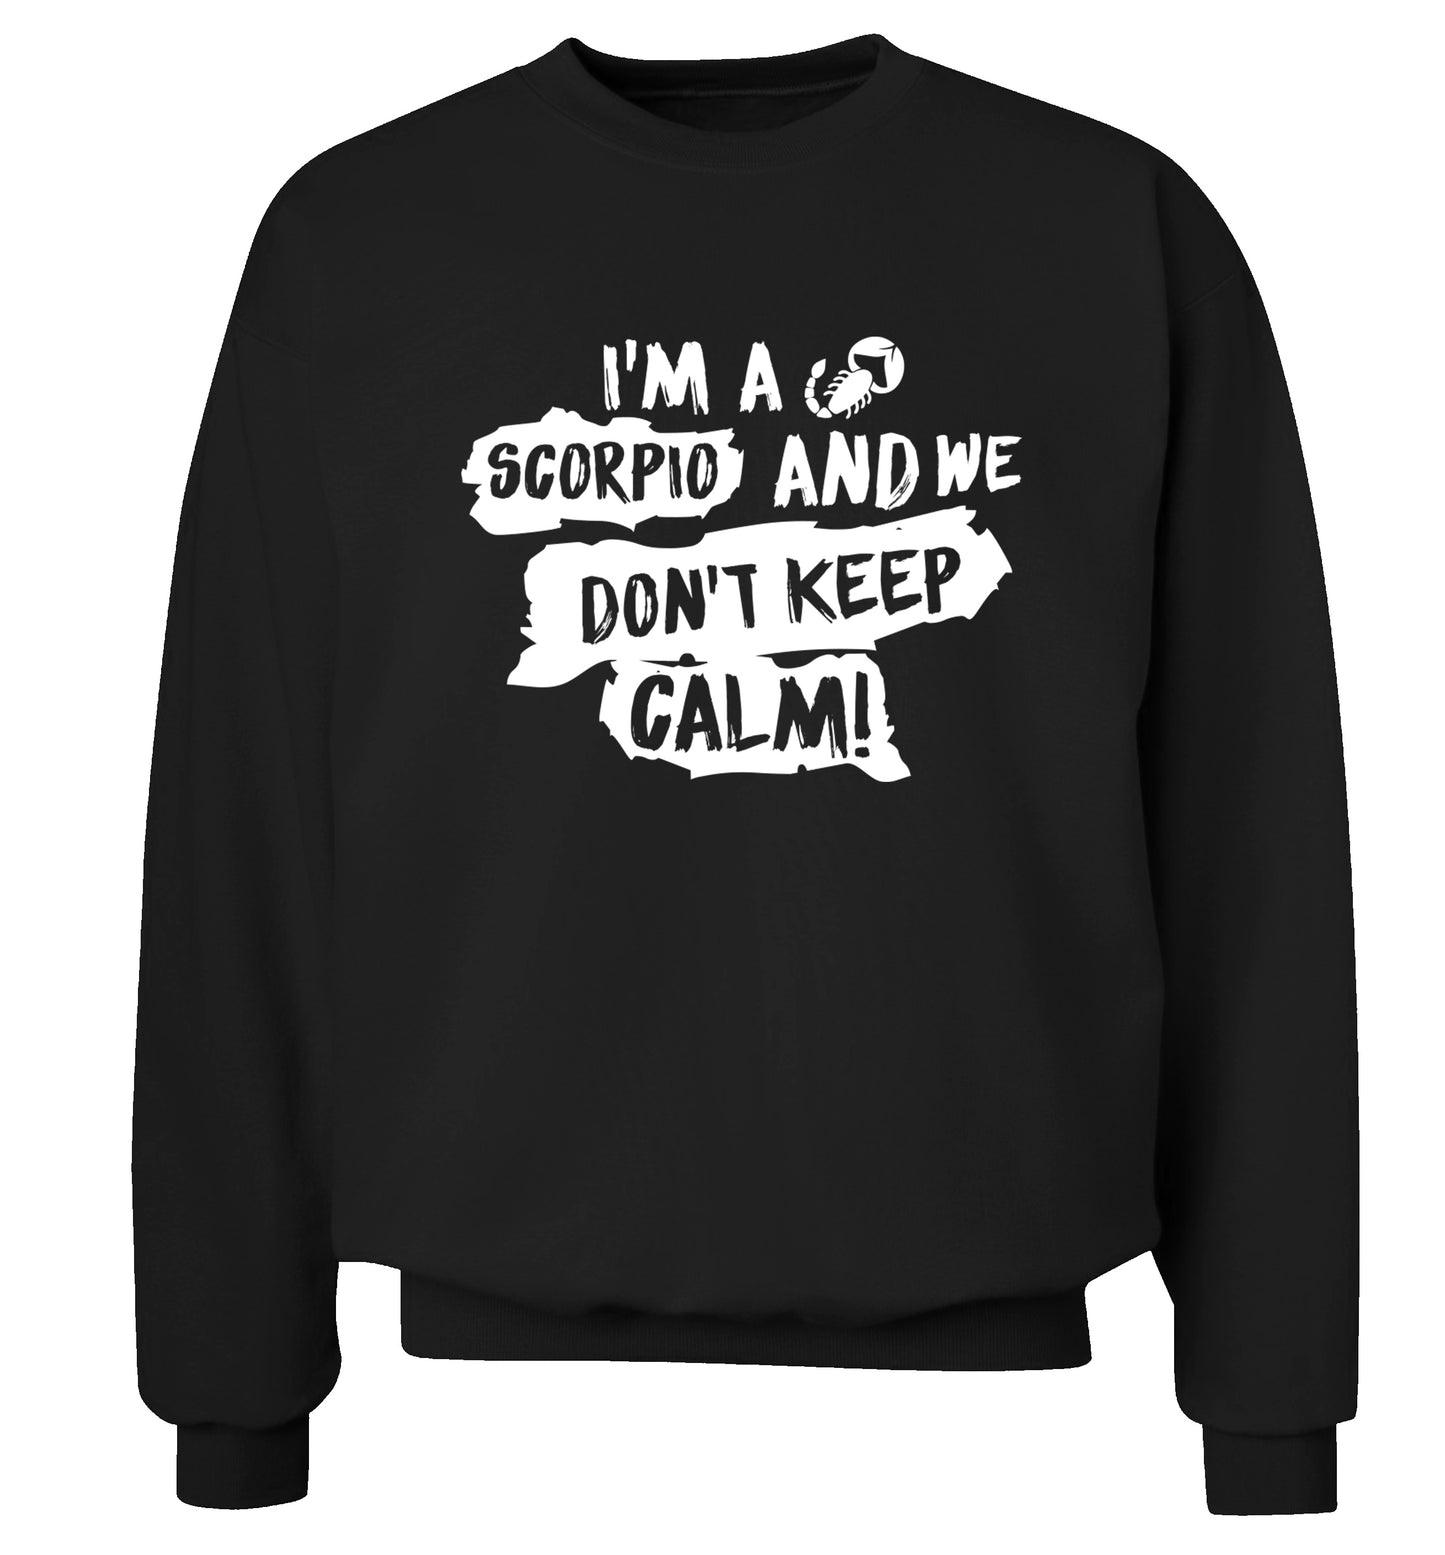 I'm a scorpio and we don't keep calm Adult's unisex black Sweater 2XL